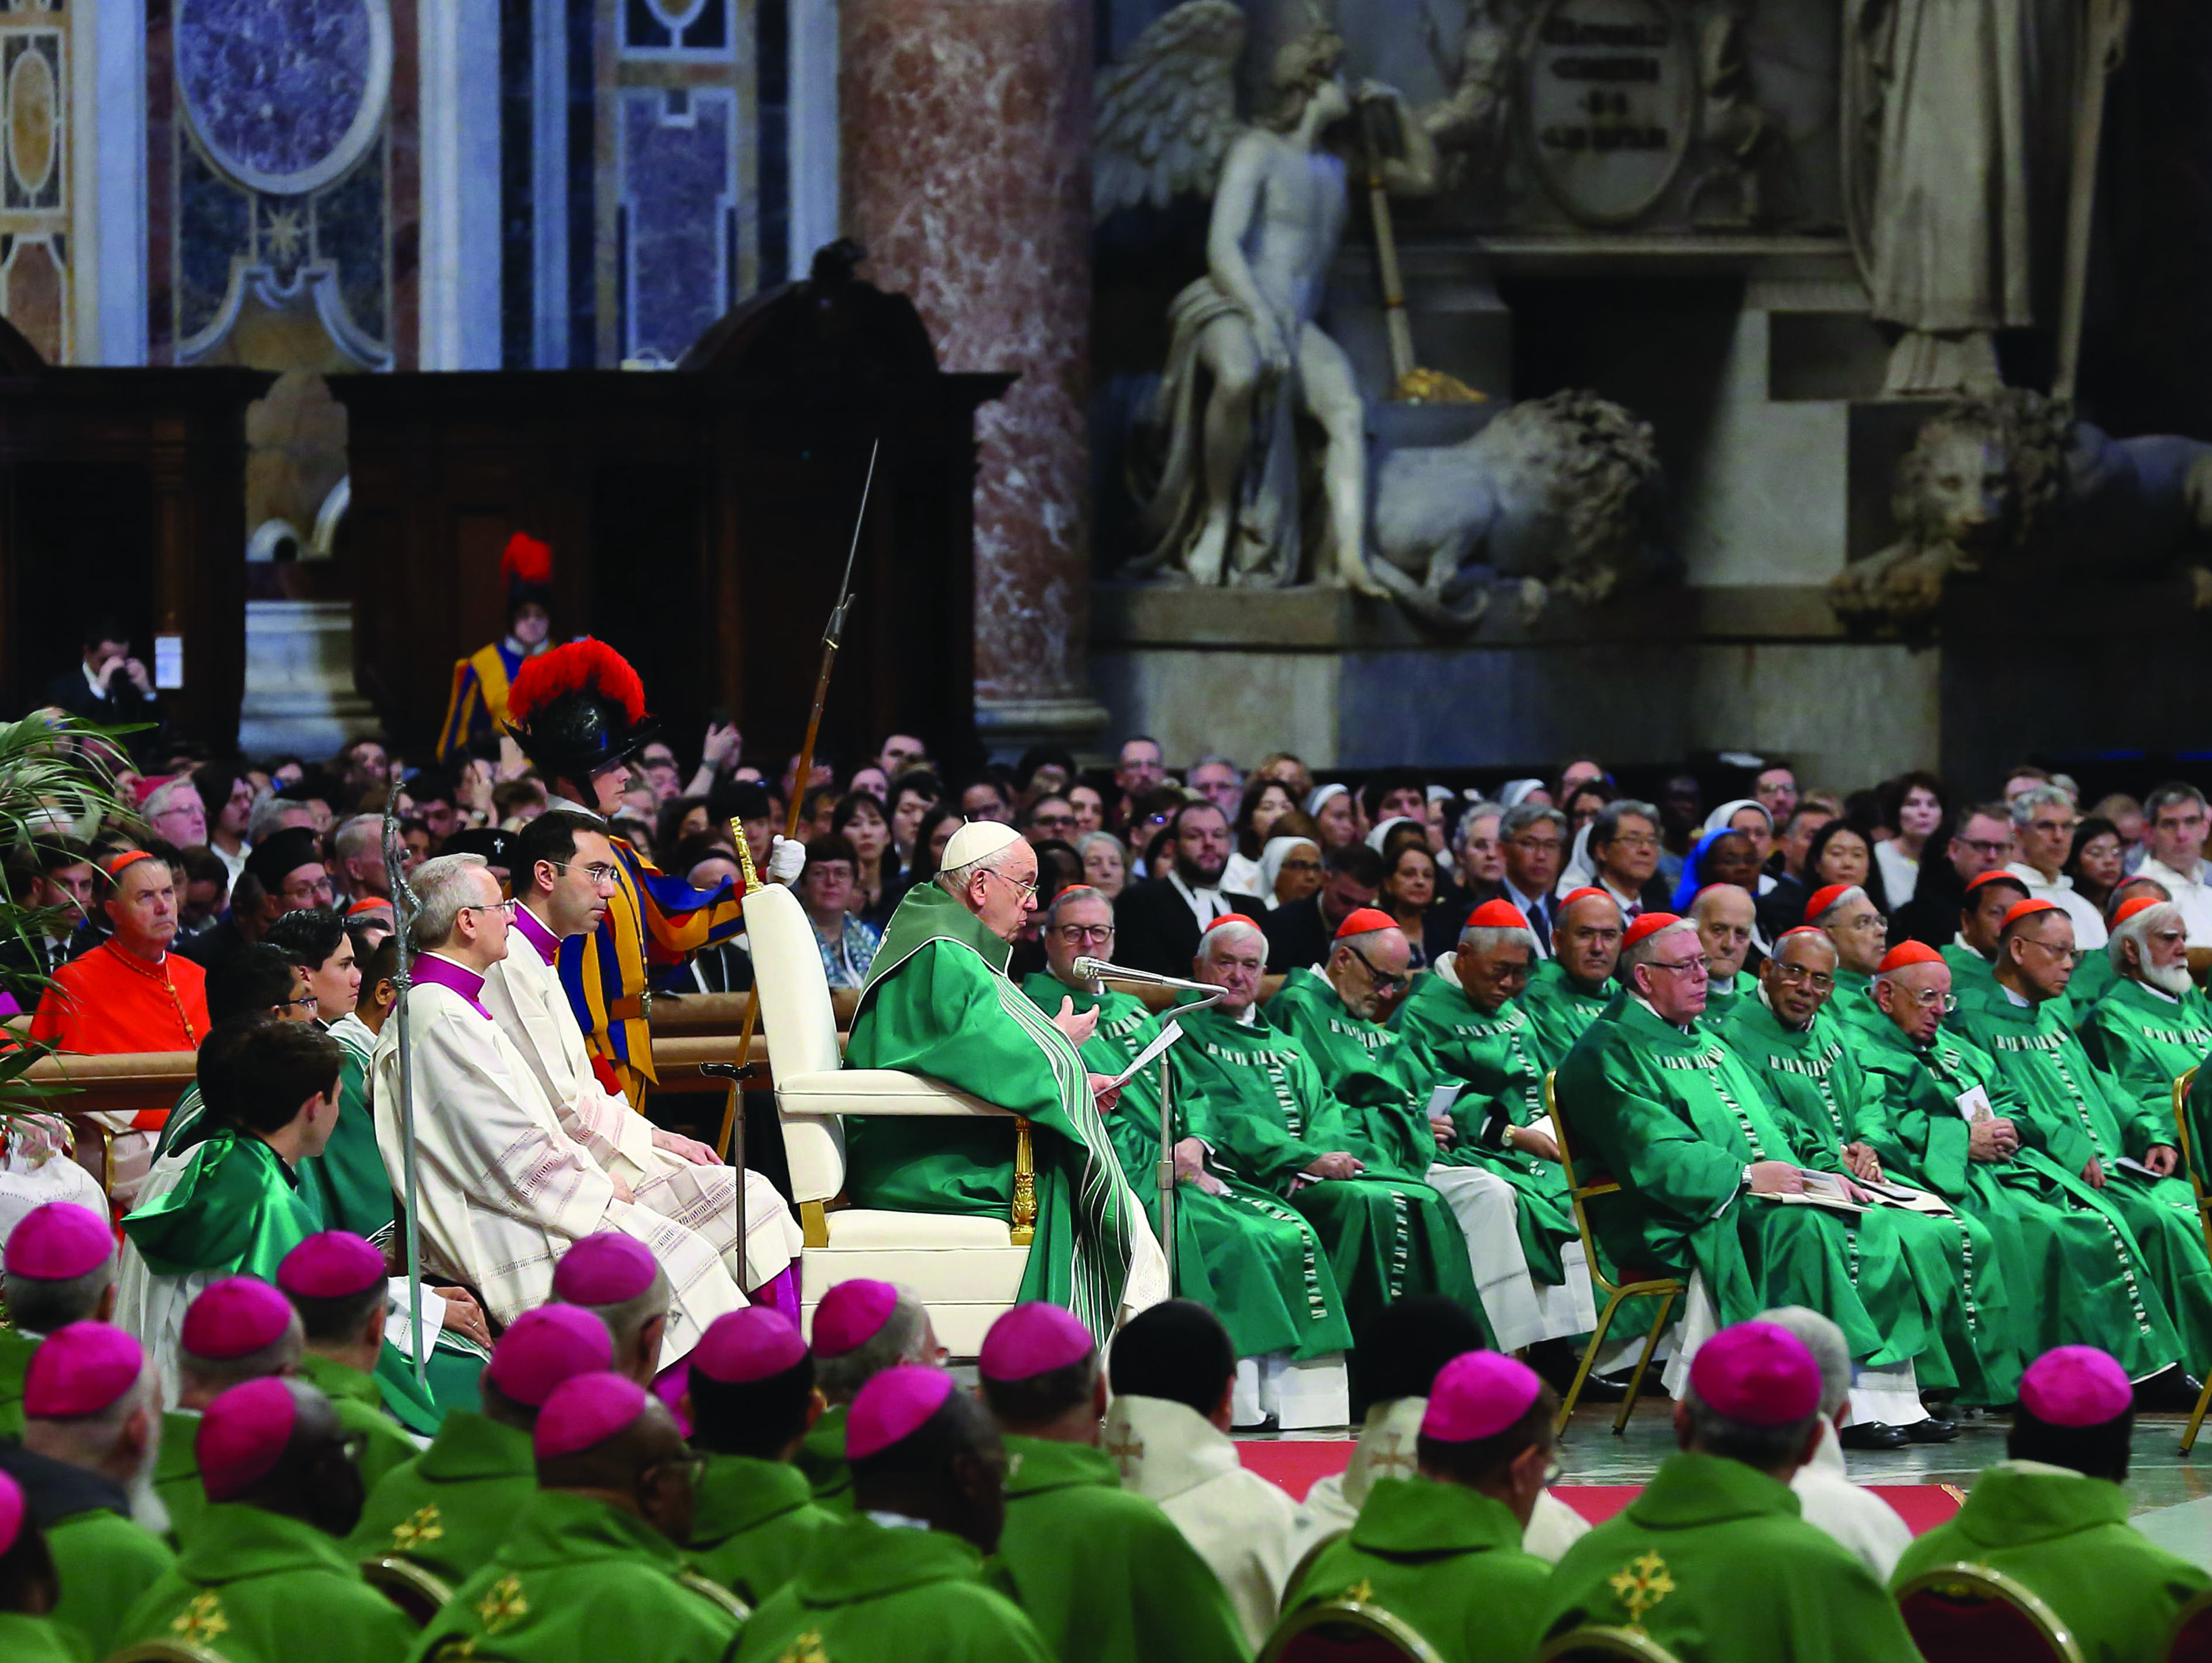 The Synod on Synodality is (finally) over